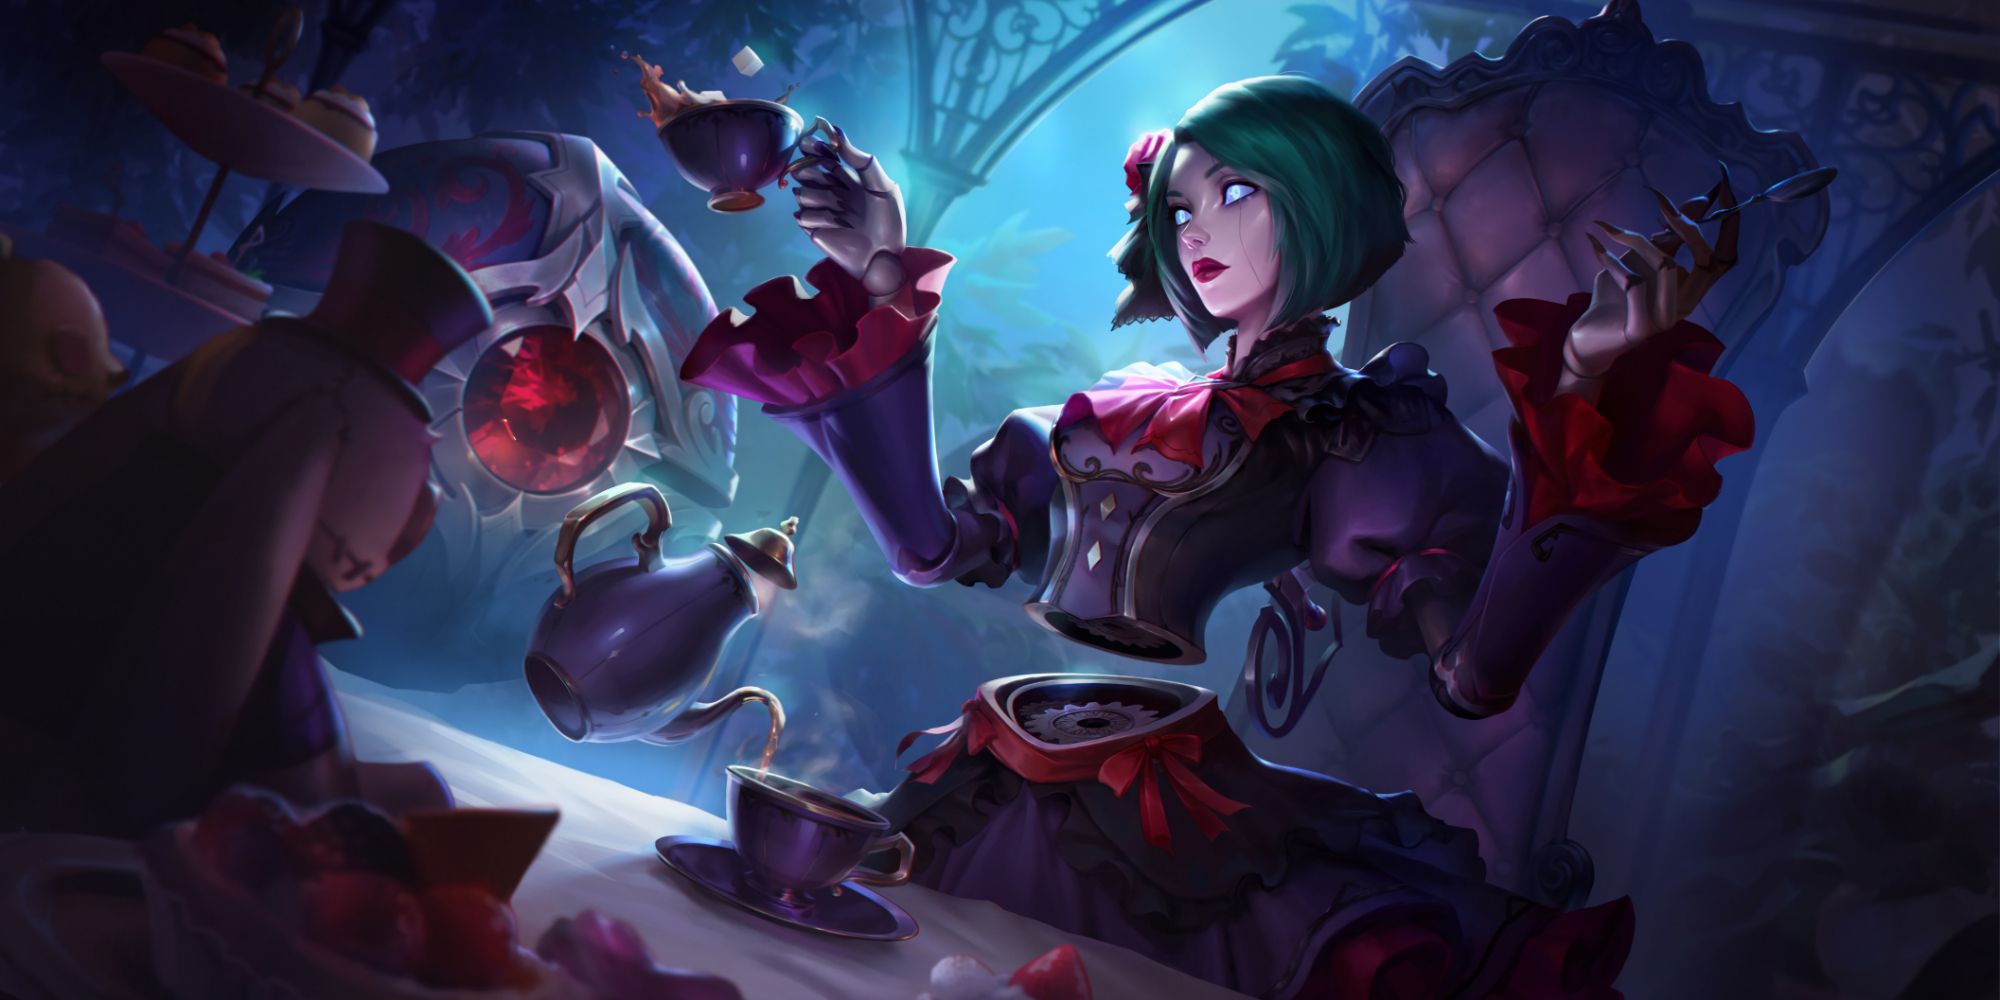 Orianna The Lady of Clockwork, in her gothic skin having some tea by misty moonlight in what appears to be a mansion